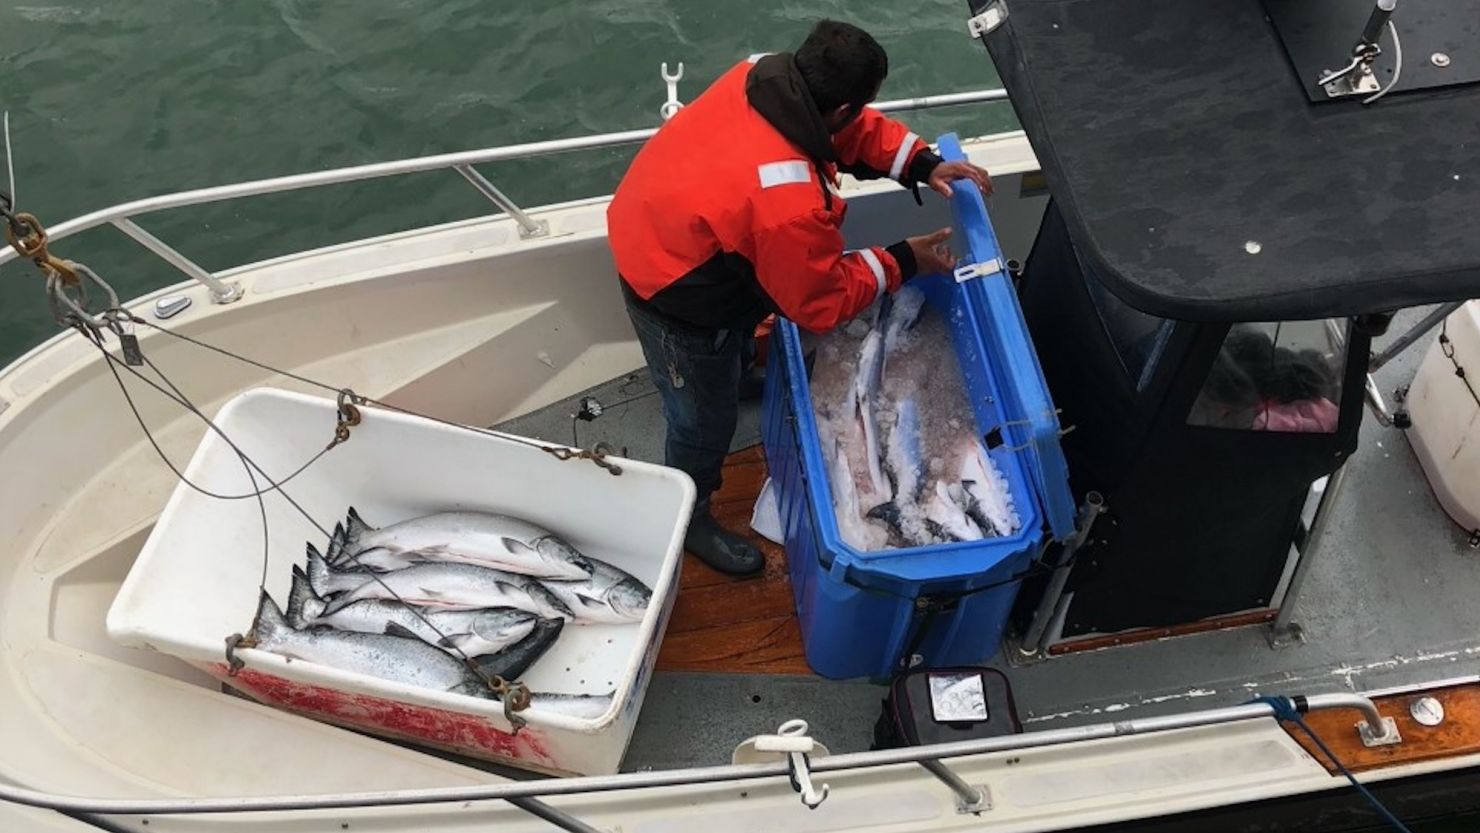 Salmon are unloaded from a fishing boat in the San Francisco Bay Area. The looming ban comes as the West sees a massive decline in fish population.